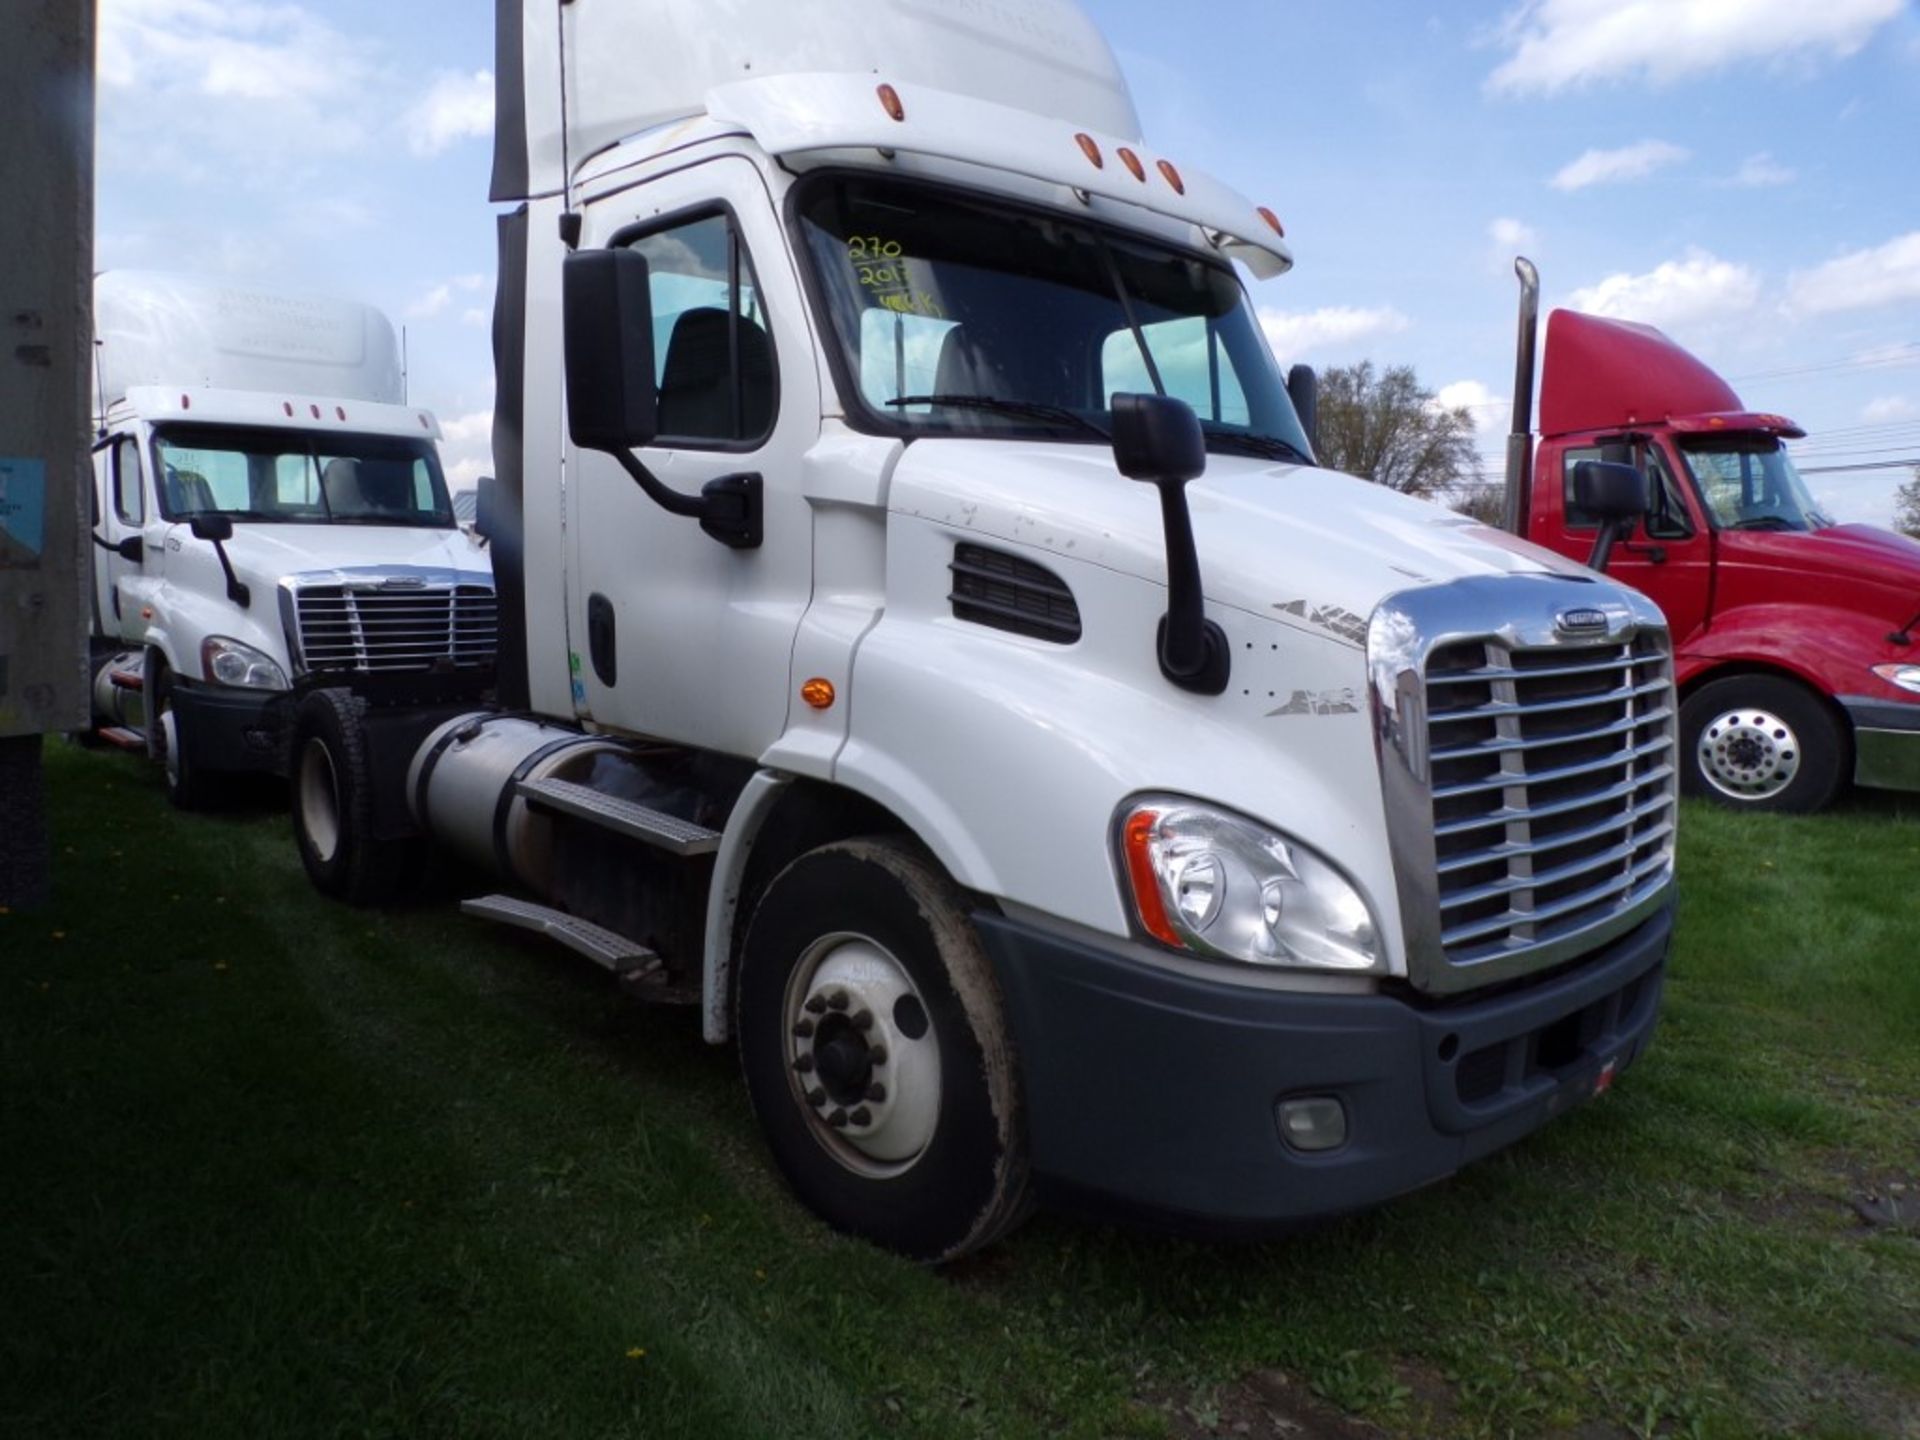 2017 Freightliner Cascadia S/A Day Cab Truck Tractor, Detroit DD13 Engine, Auto Trans., 12K - Image 5 of 7